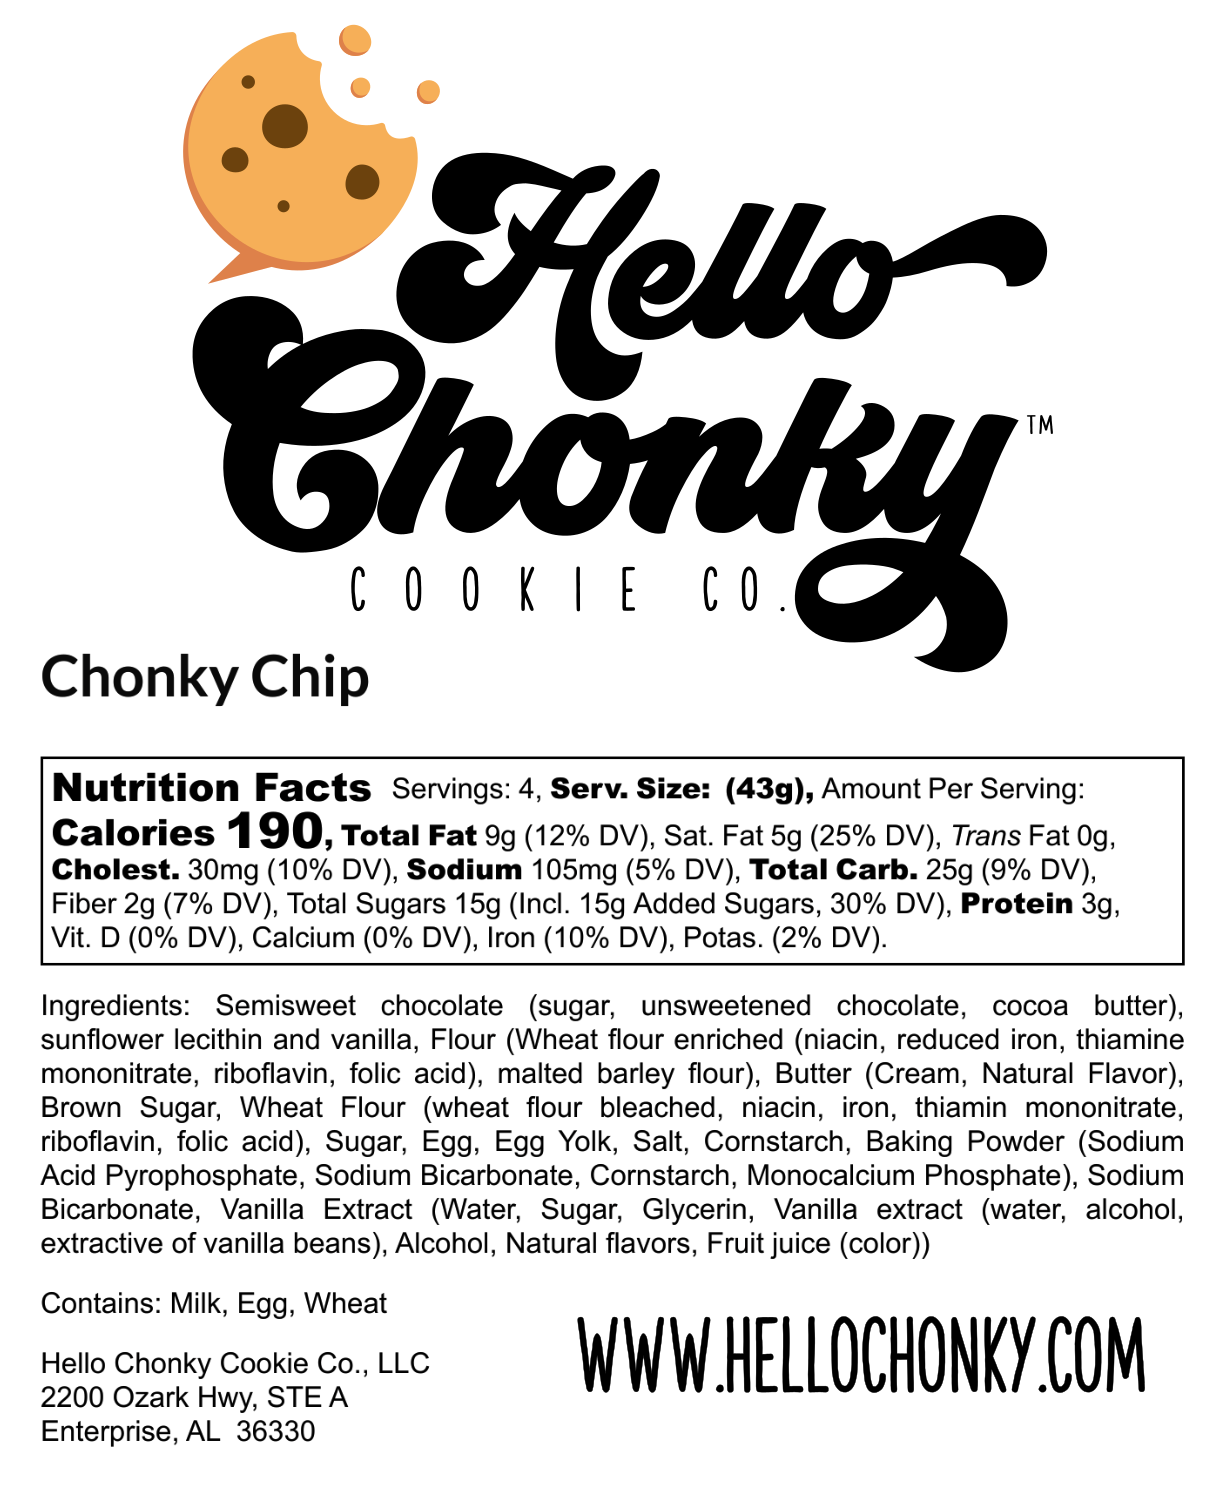 Chonky Chip